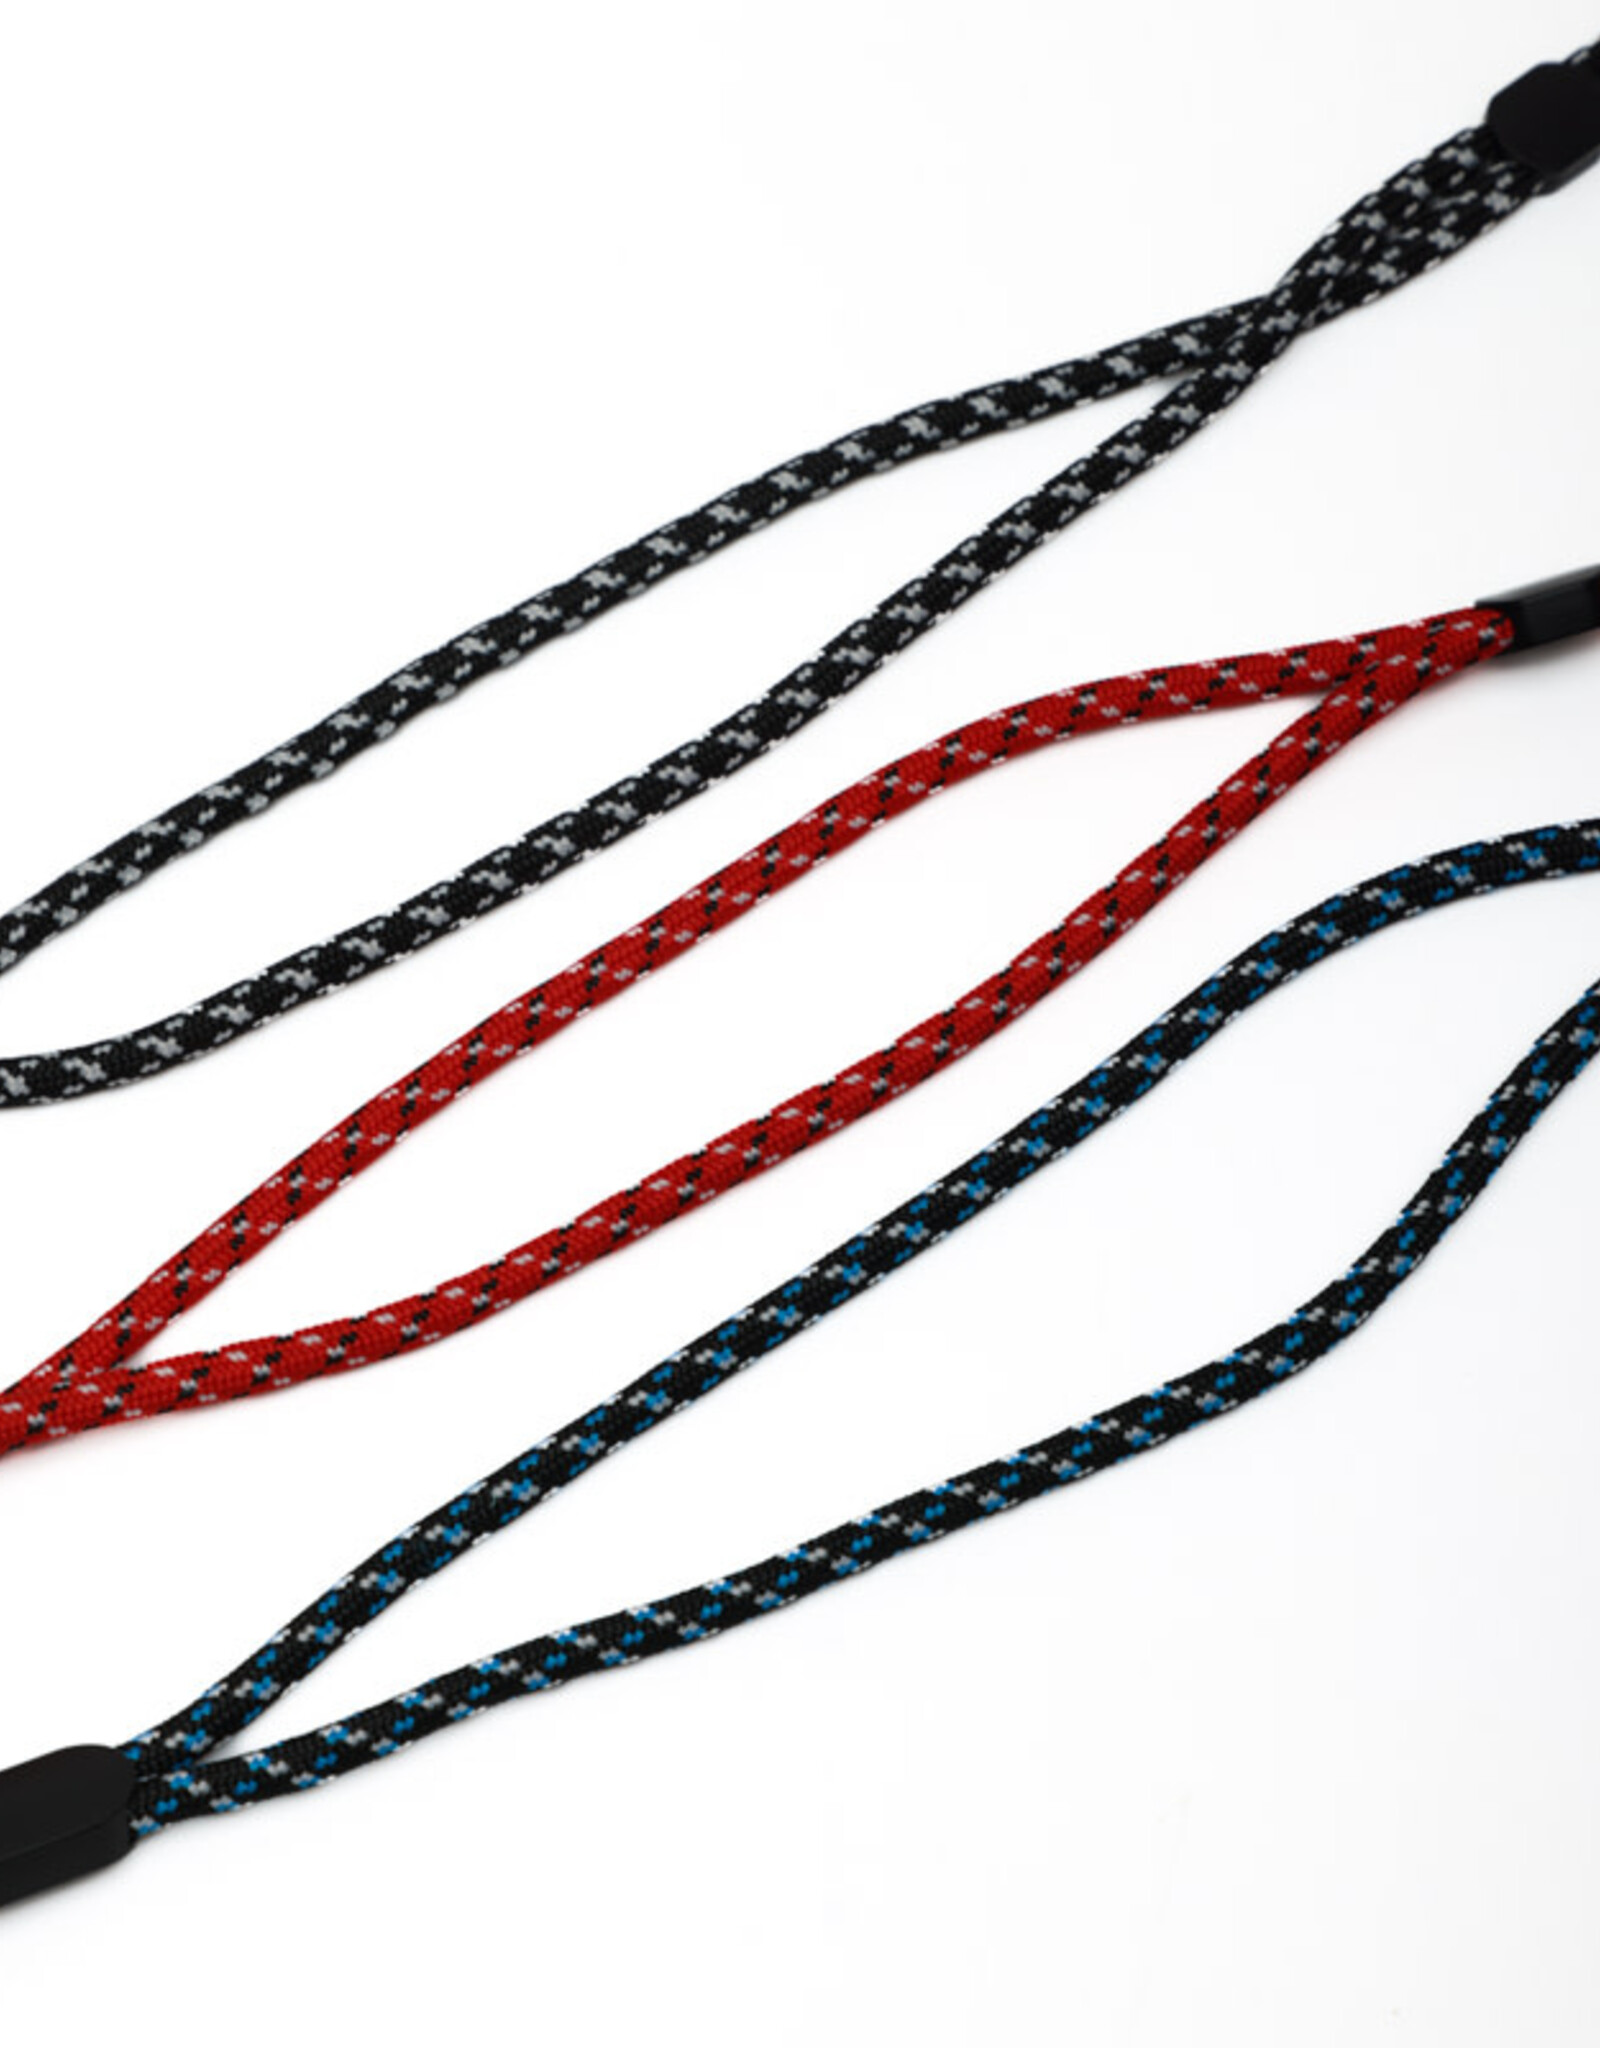 Long Red, Black, and White Braided Neck Strap